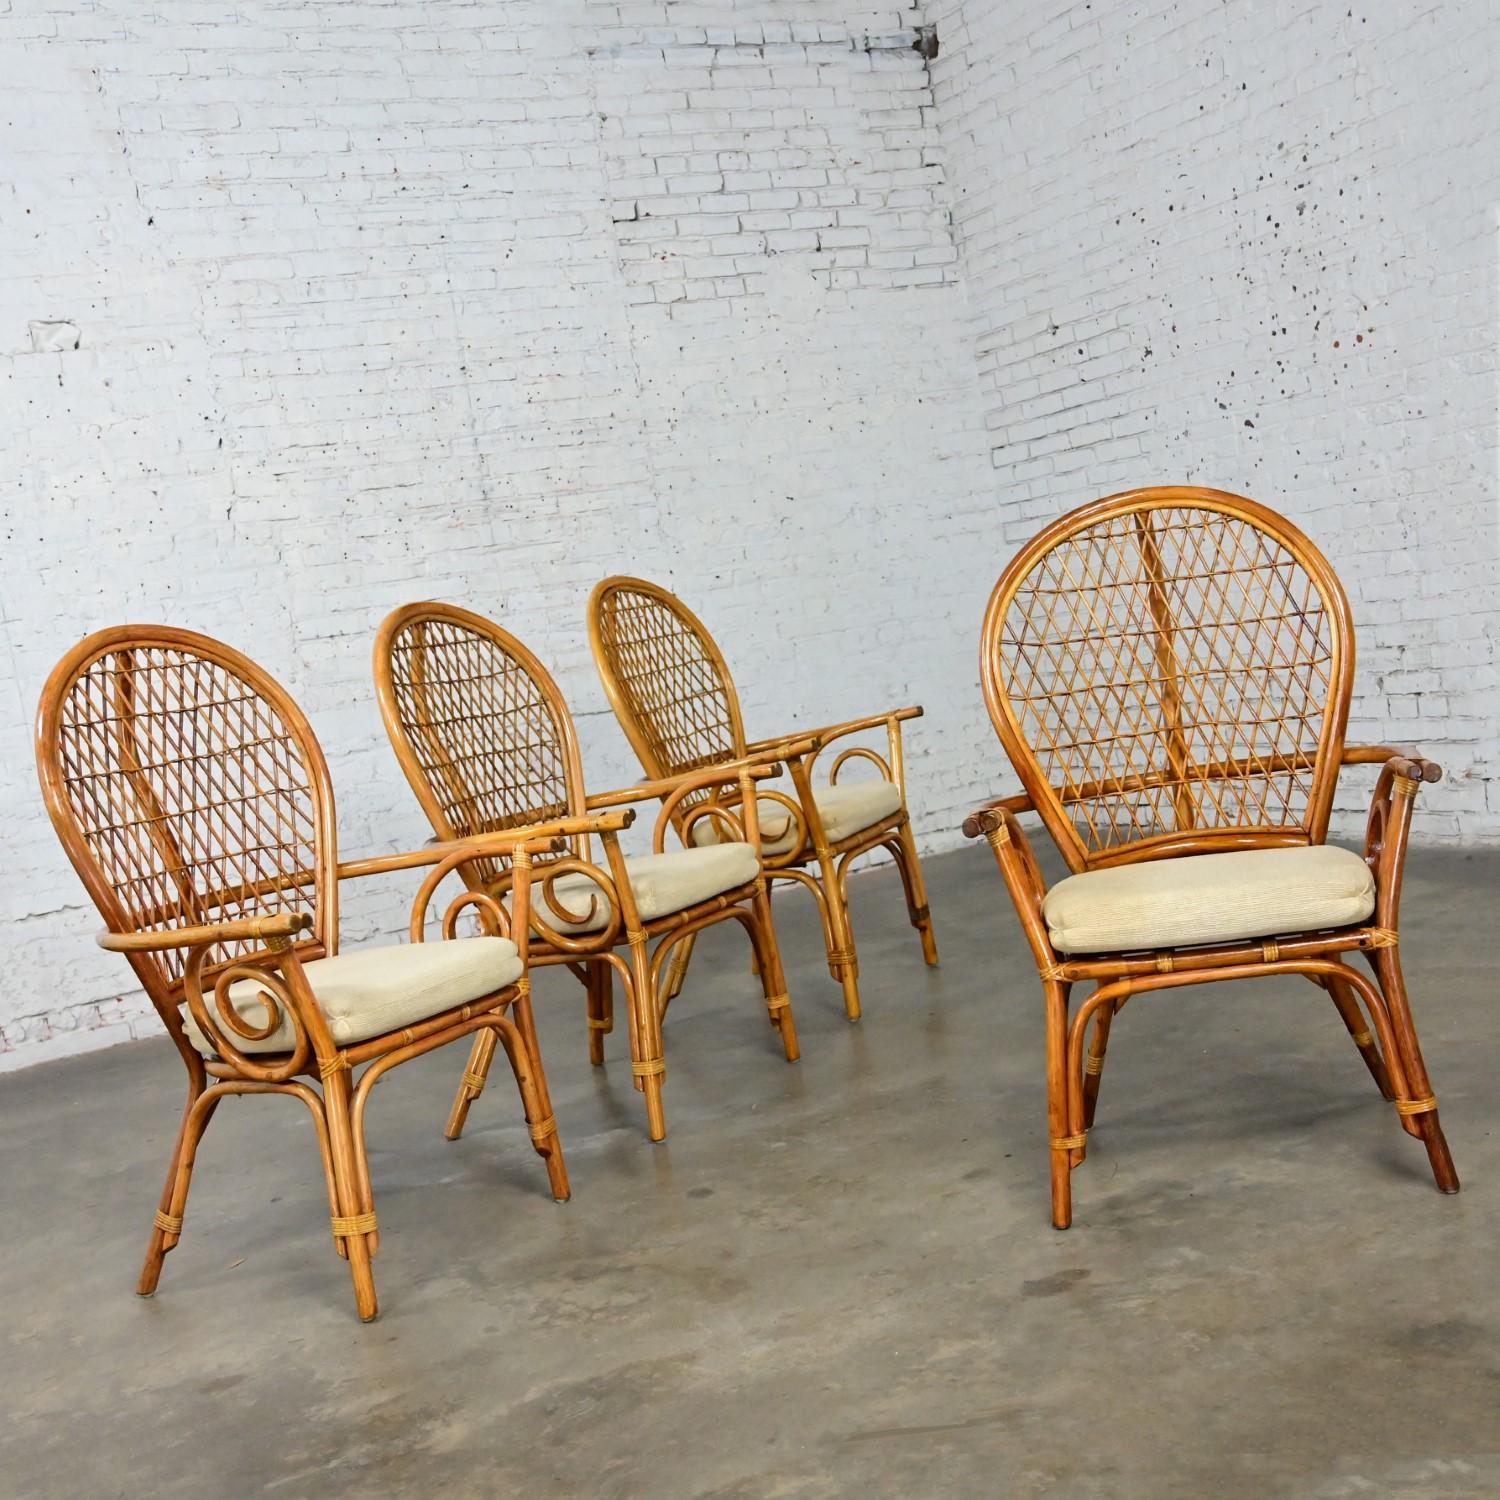 Coastal Island Style Hollywood Regency Balloon Back Rattan Dining Chairs Set 4 In Good Condition For Sale In Topeka, KS